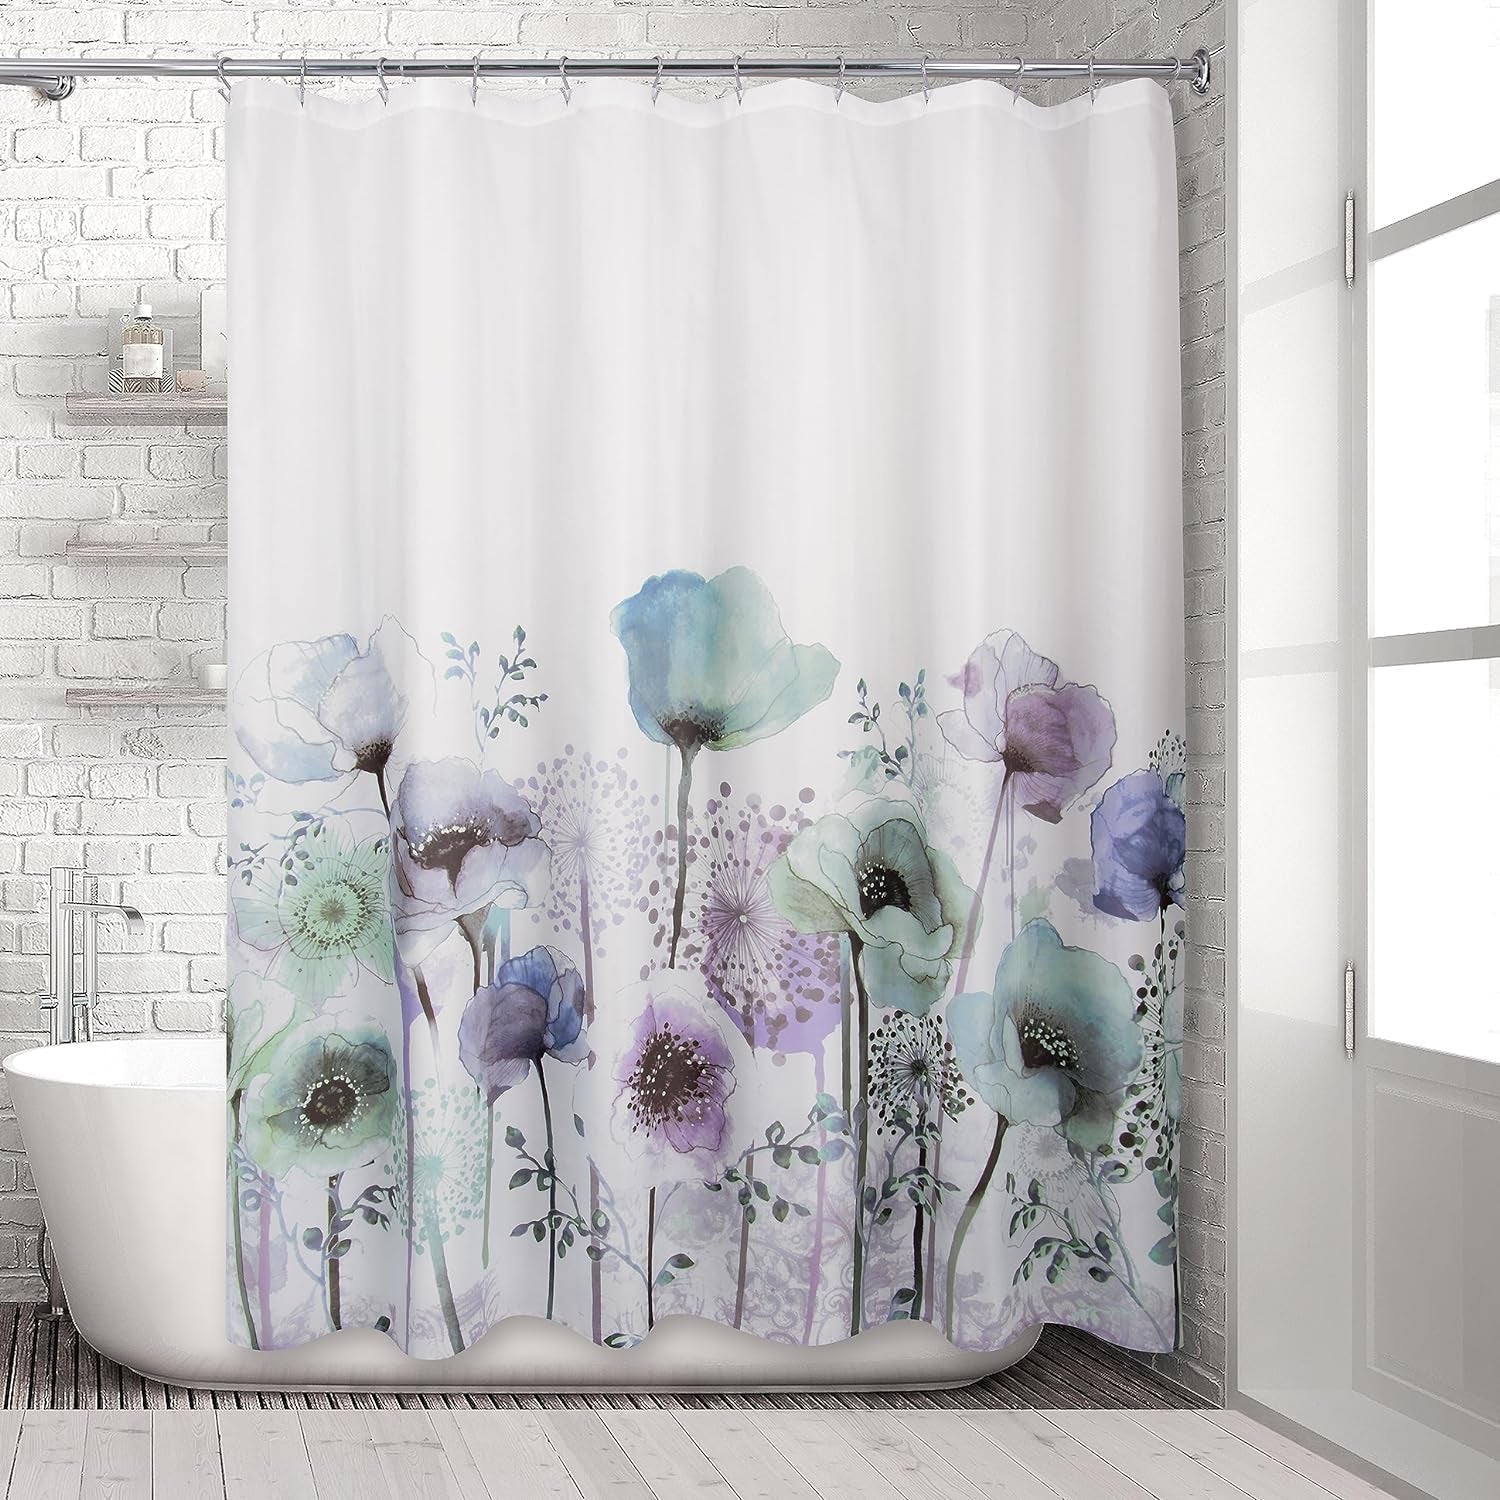 Allure Home Creation Poppies Watercolor Polyester Microfiber Fabric Printed Shower Curtain 70"X72"-Blue/Green/Purple